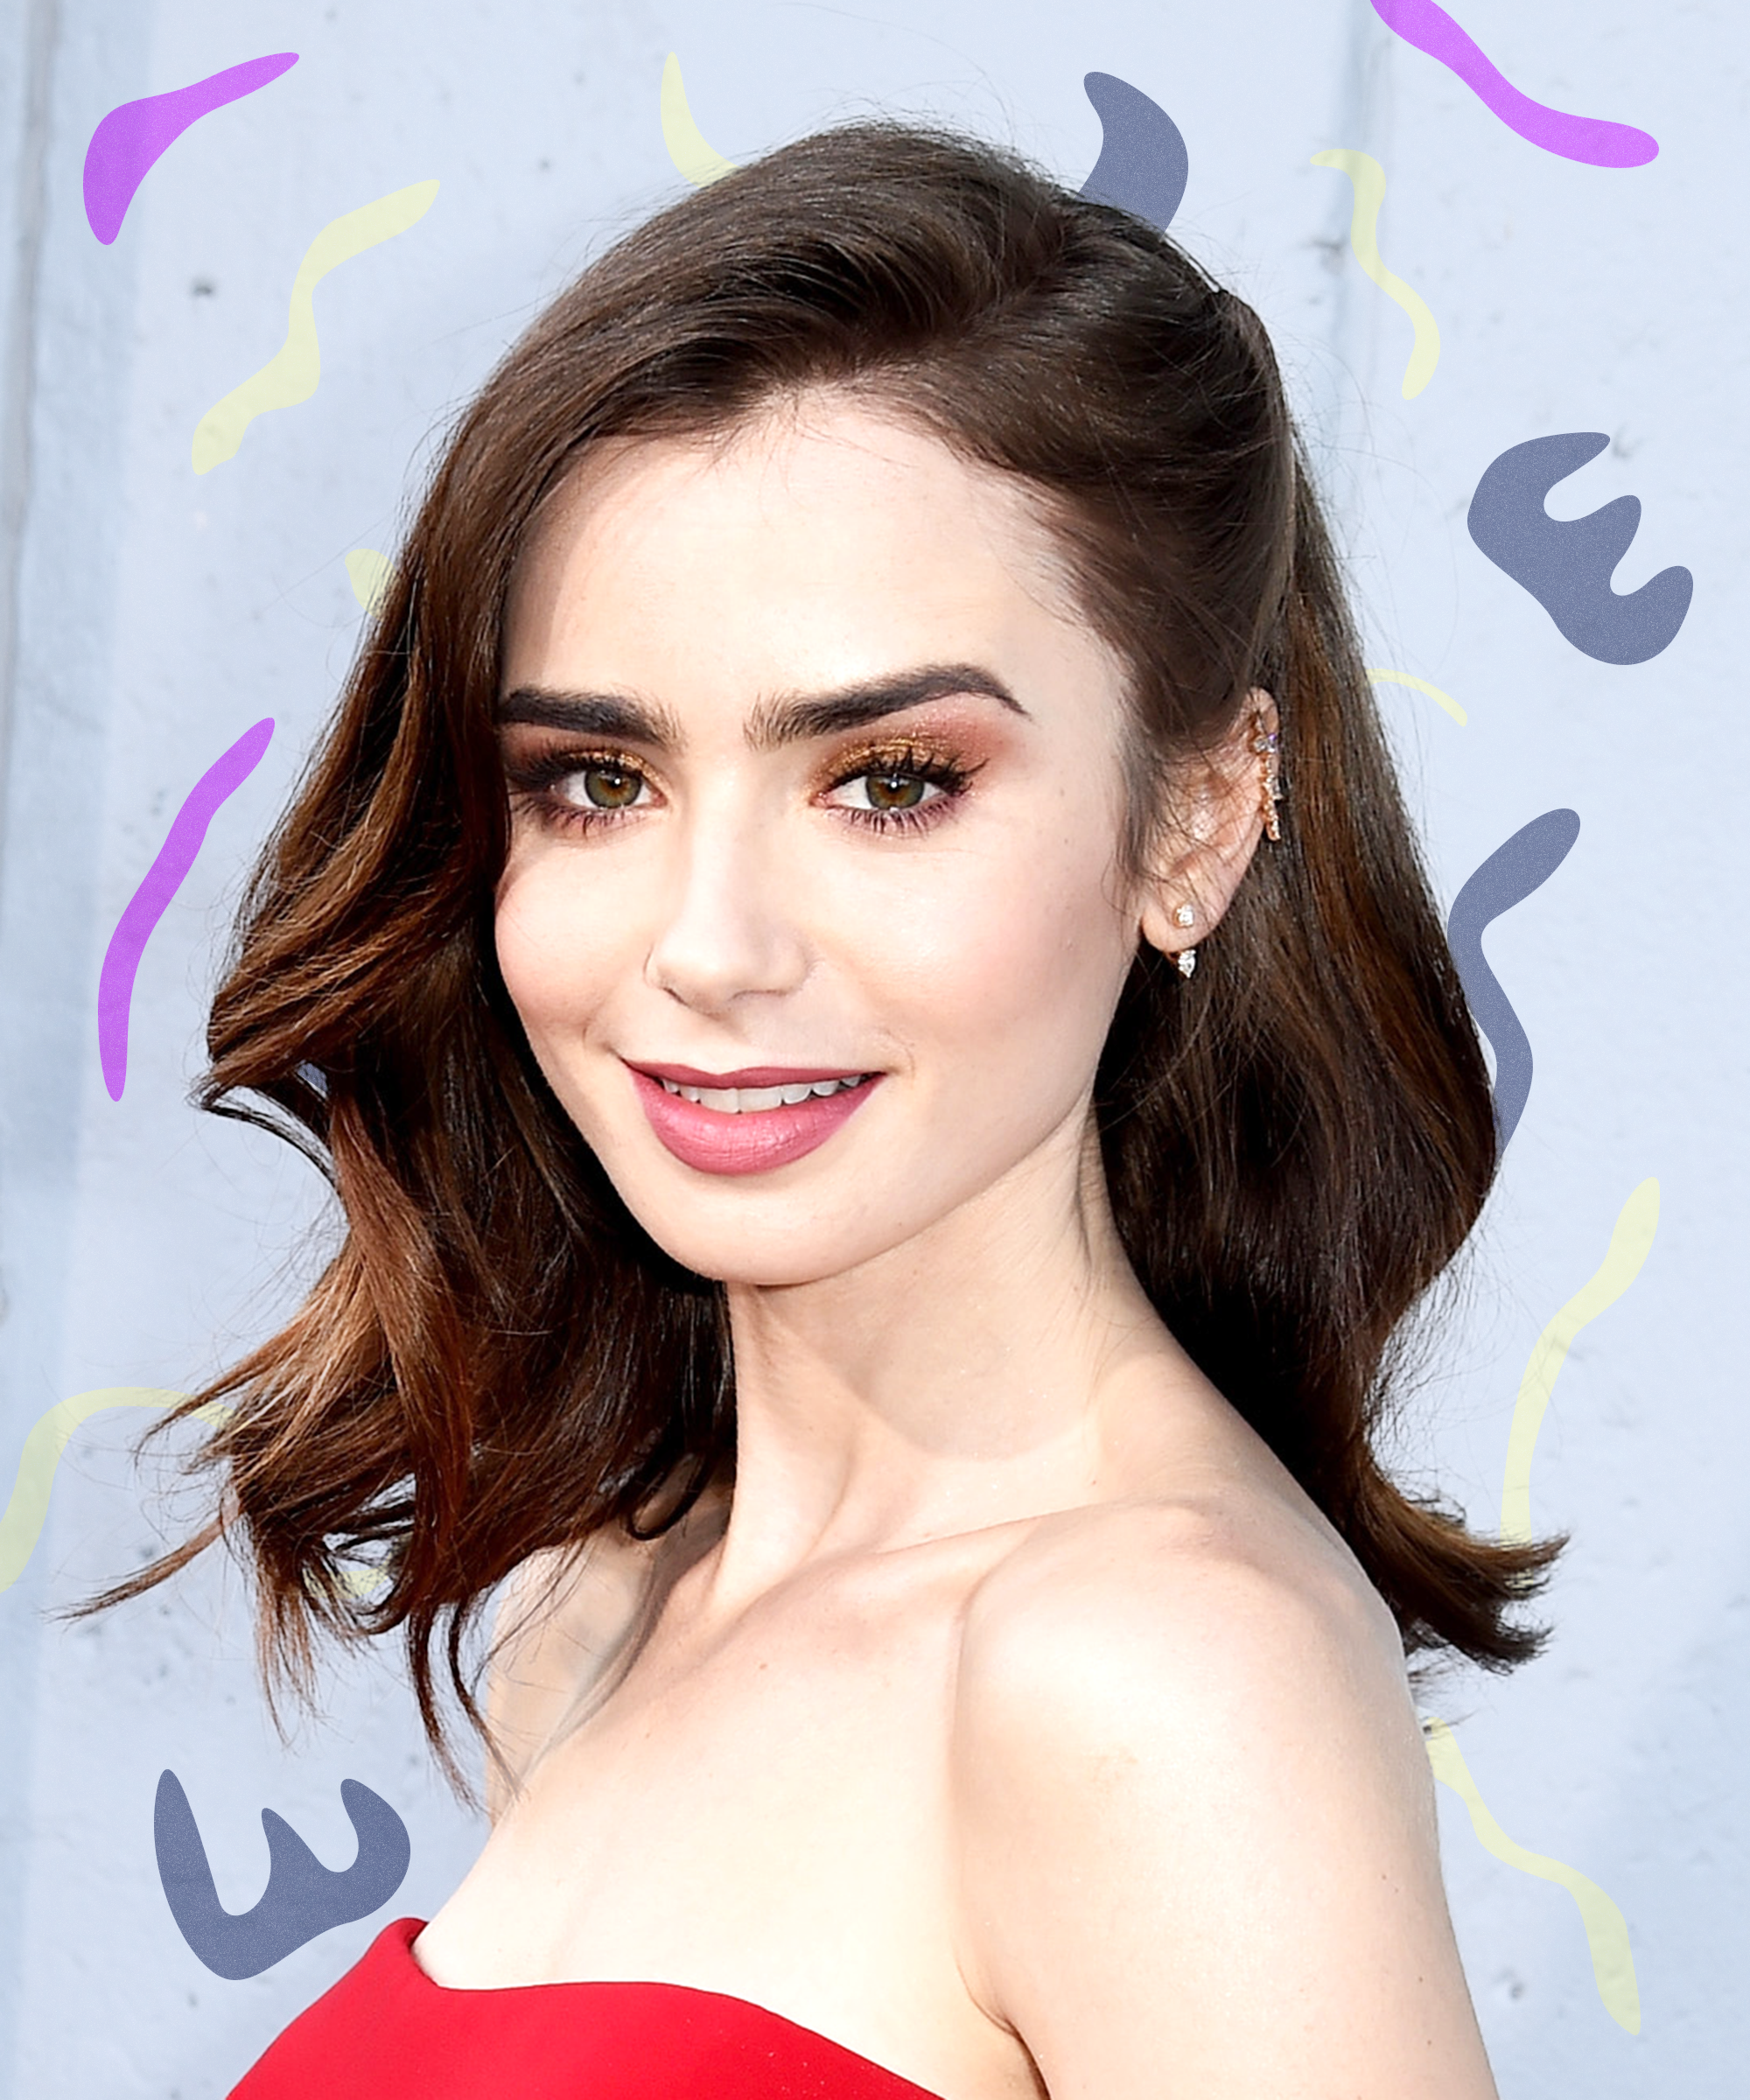 barron oneal share lily collins fakes photos